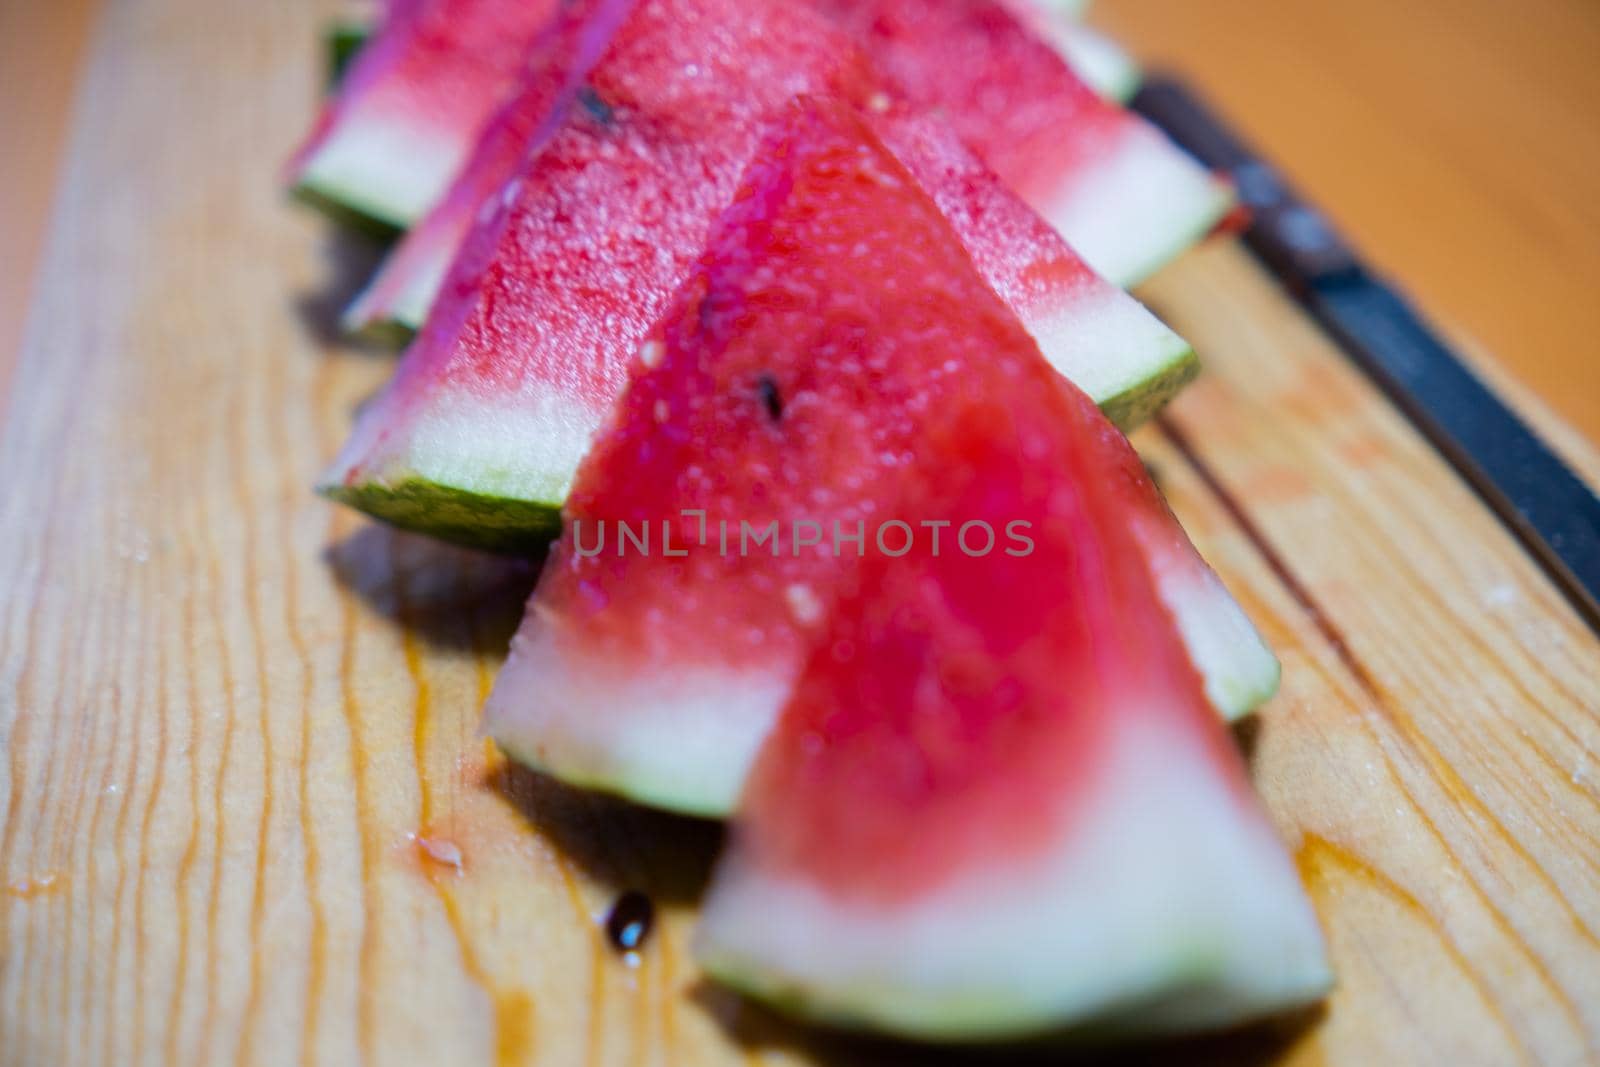 Close-up of juicy watermelon slices on wooden surface by Kanelbulle